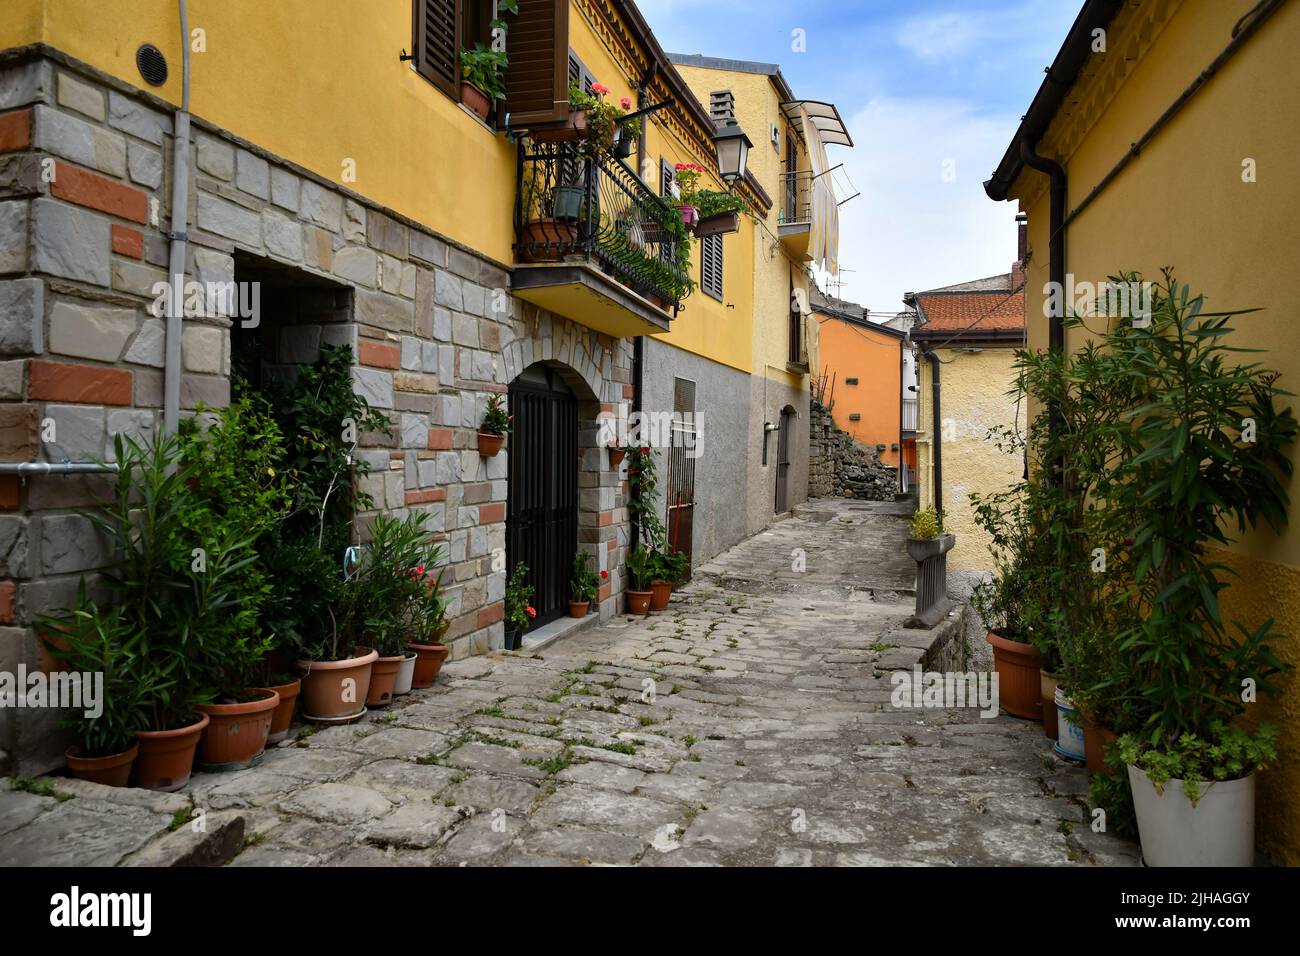 A narrow street between the old houses of Albano di Lucania, a village in the Basilicata region, Italy. Stock Photo